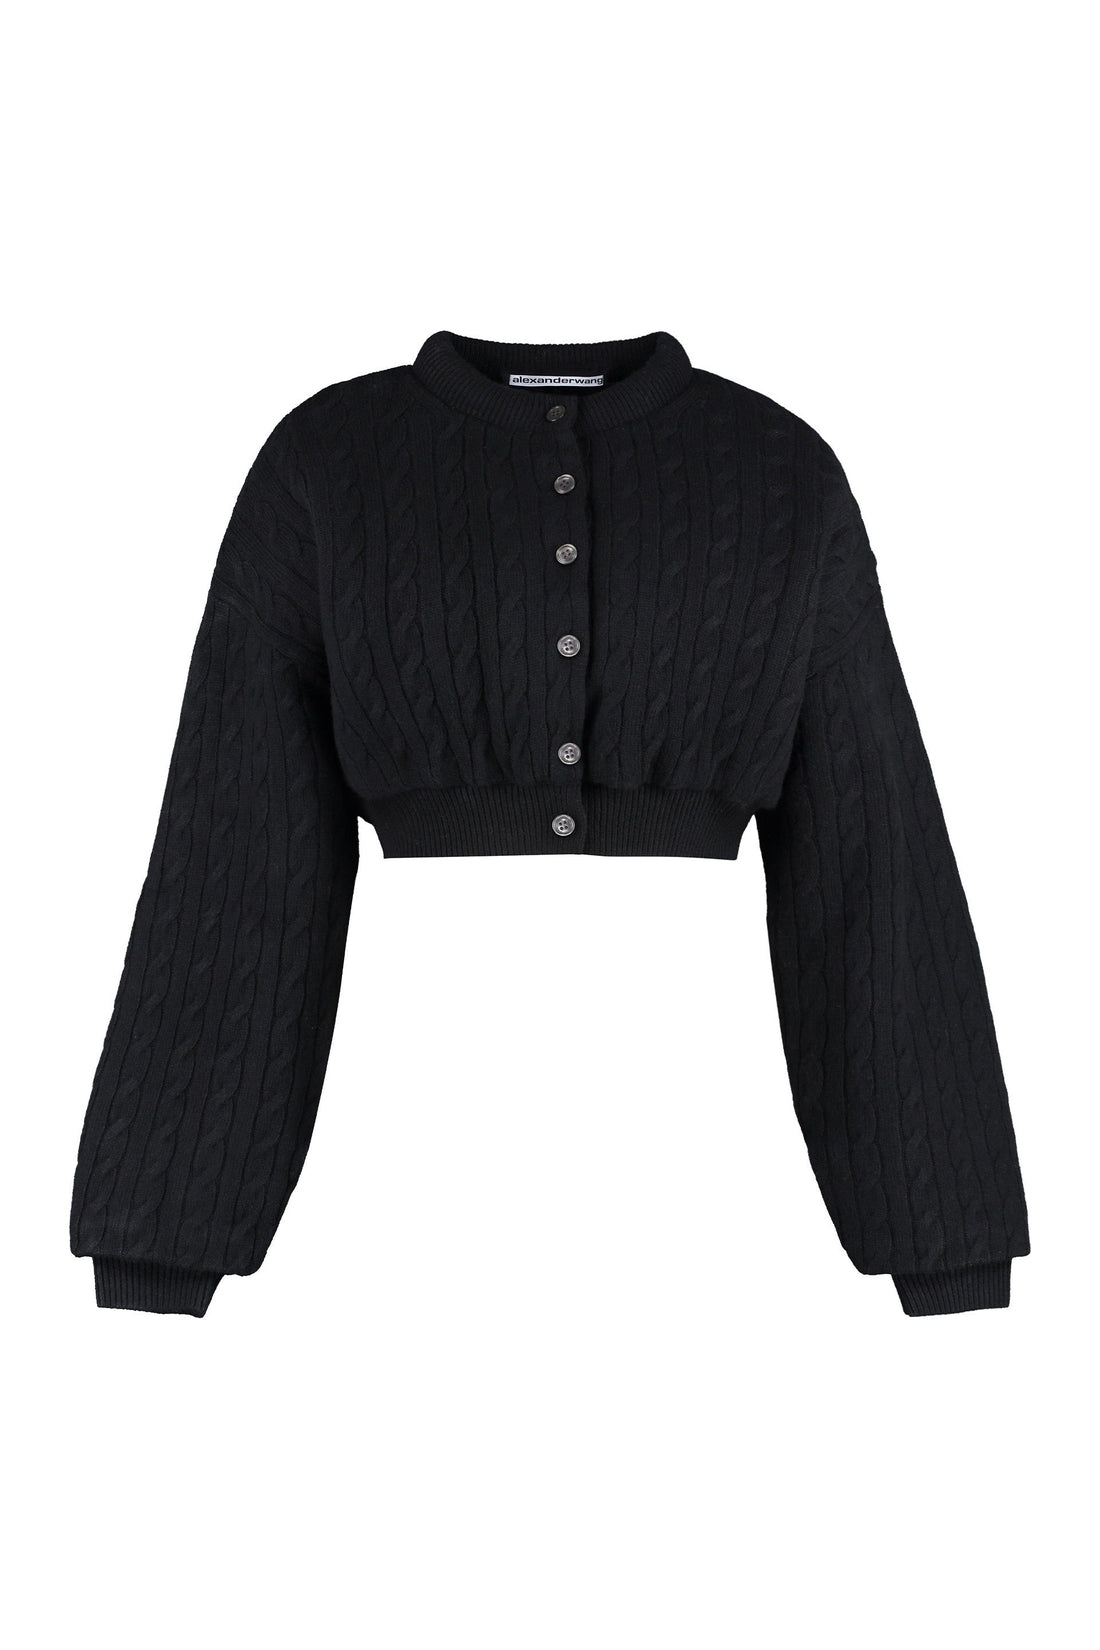 Alexander Wang-OUTLET-SALE-Cropped-length knitted cardigan-ARCHIVIST